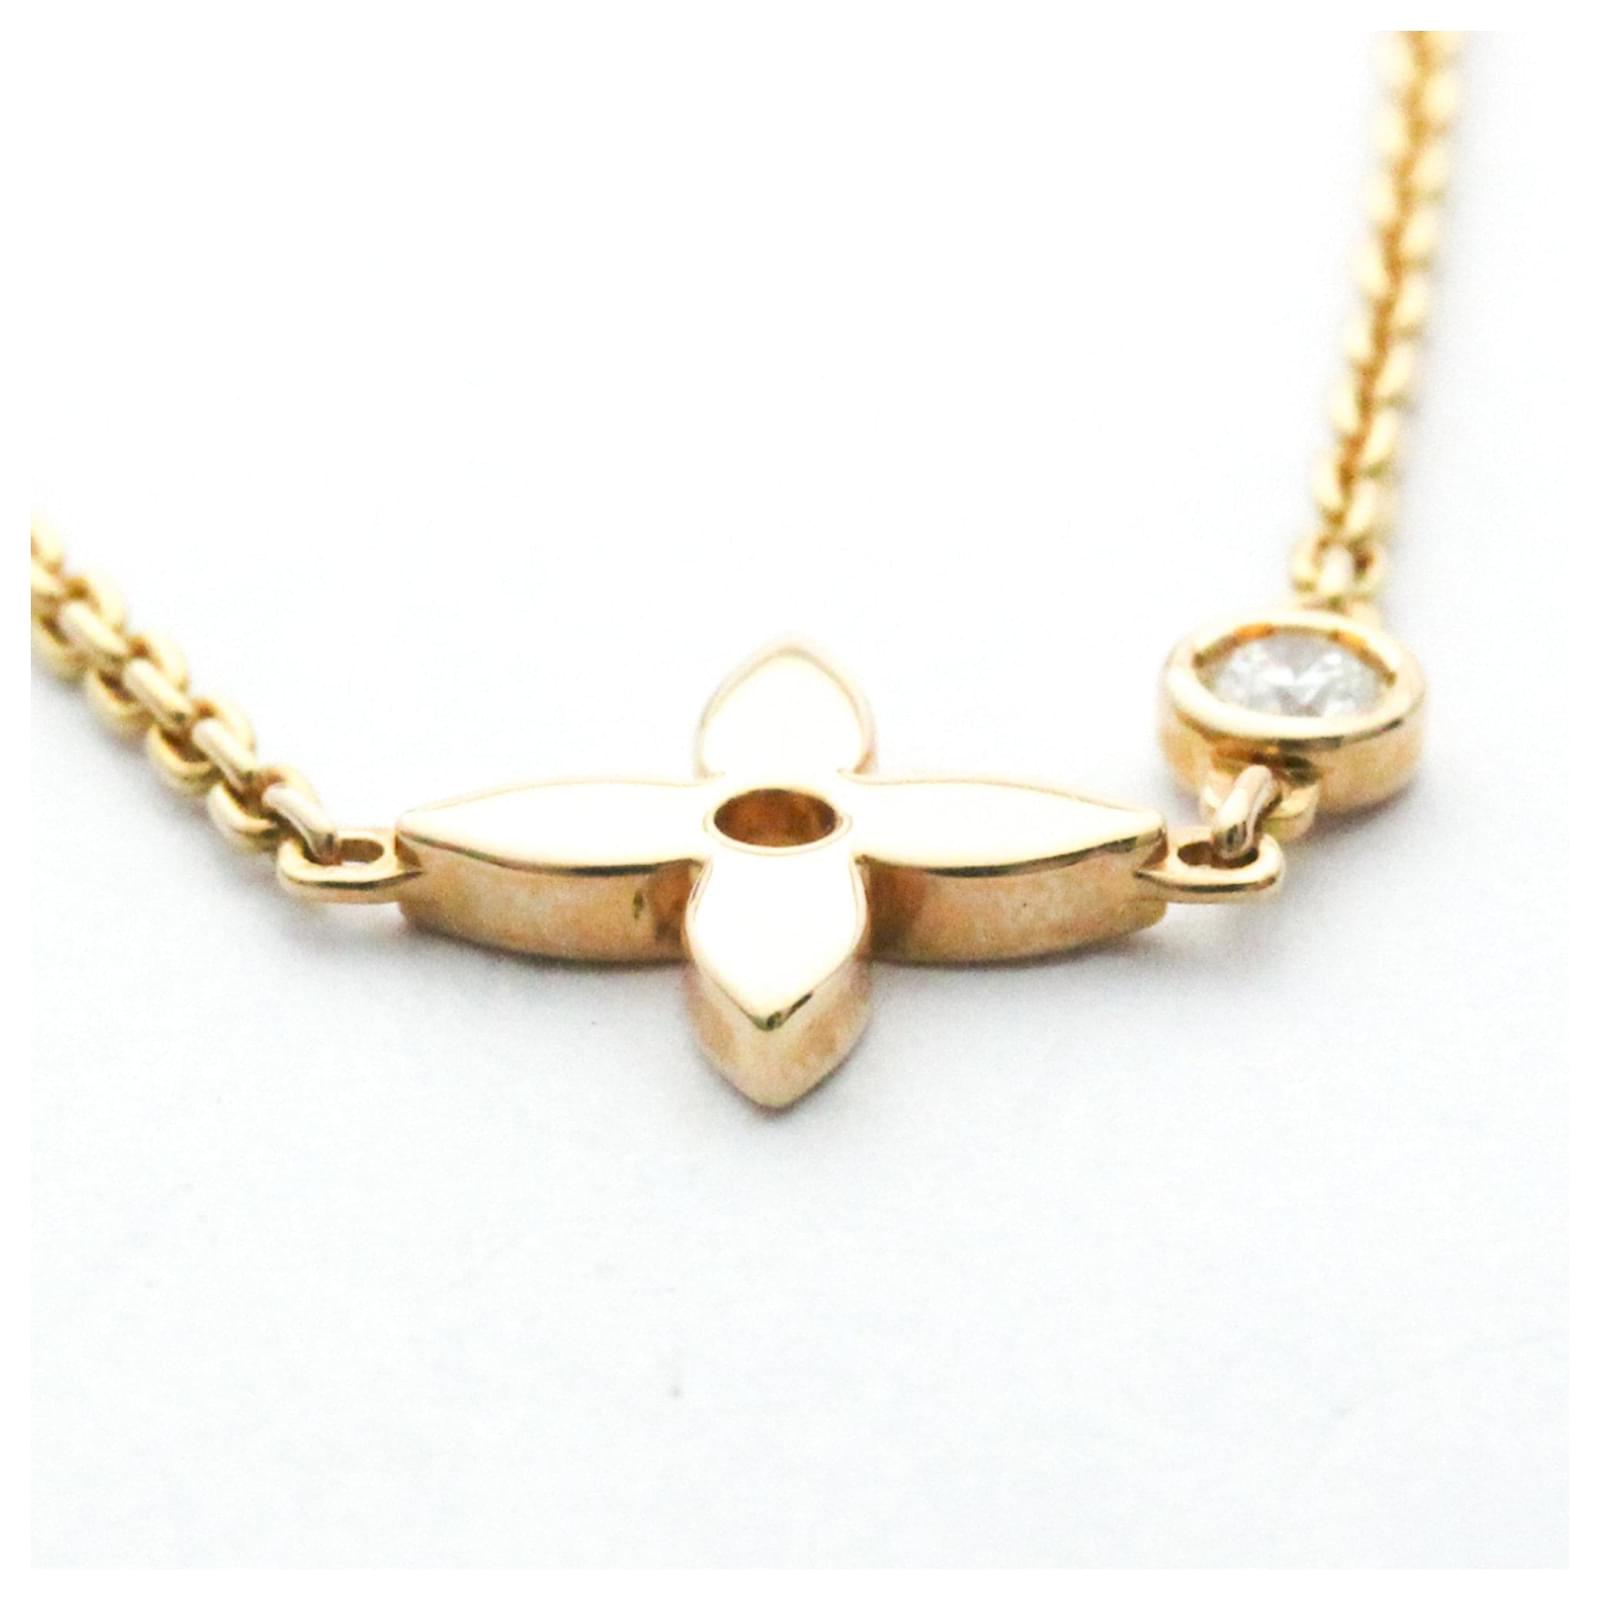 Louis Vuitton Idylle Blossom Necklace in 18K Rose Gold 0.2 CTW